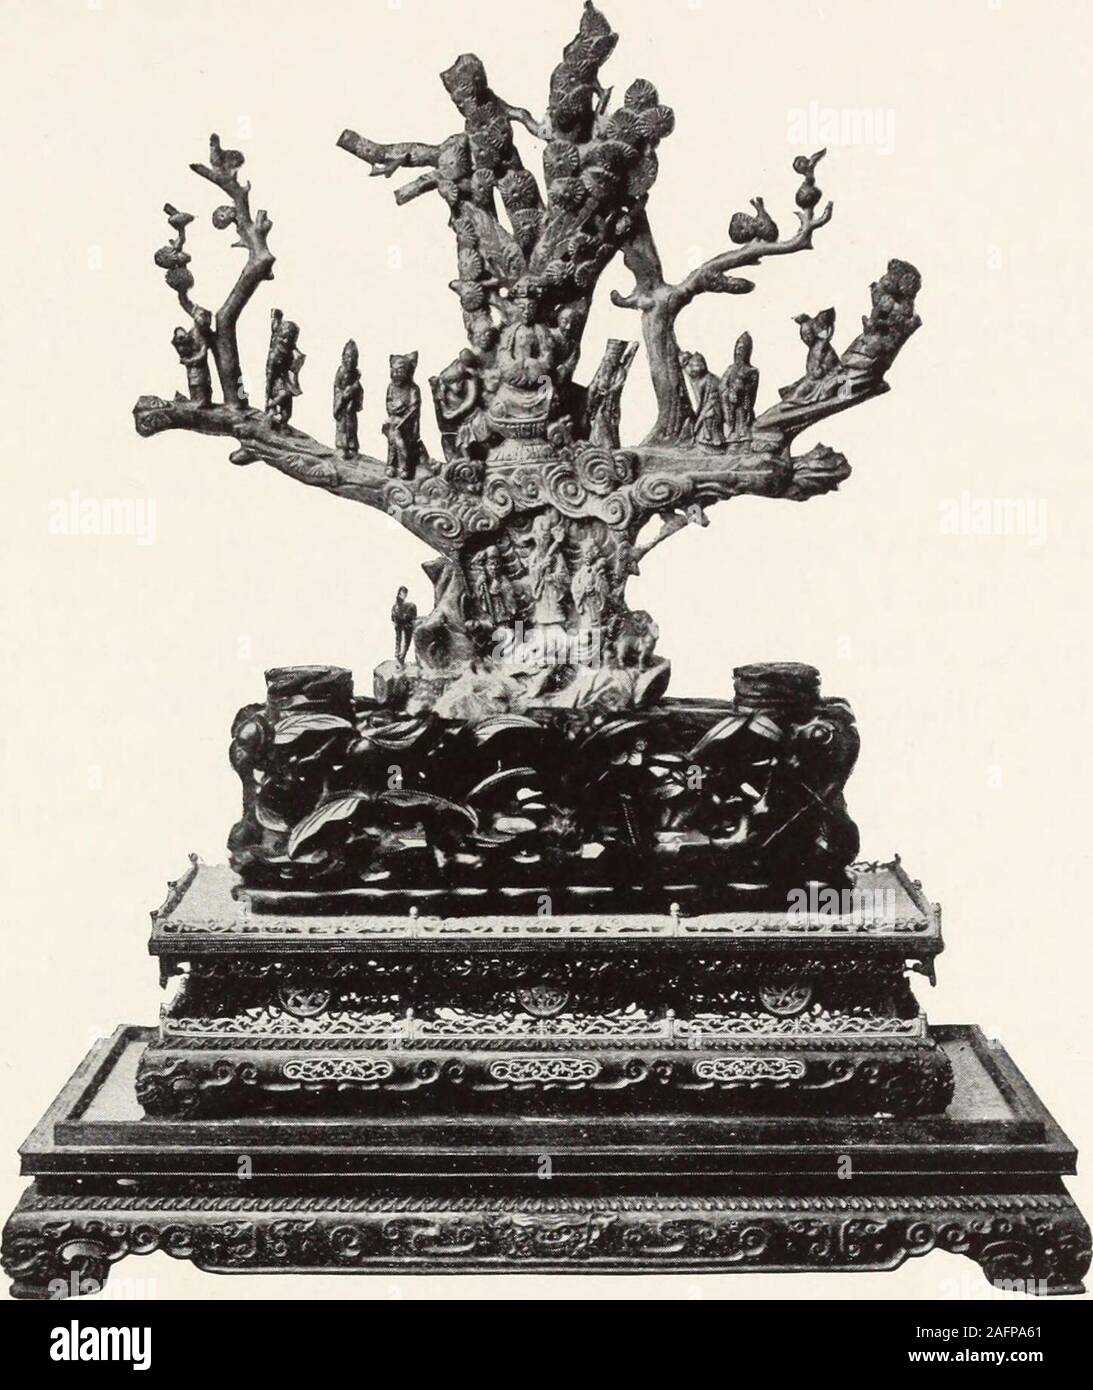 . Rare and beautiful Oriental art treasures of supreme quality. 142—Imperial Wedding Gift {CJiien-lung) Coral statuette of Lan Tsai-ho, of the eight Taoist genii,carrying her basket of flowers. The tall, standing, lithe-some figure is carved from a single piece of richly mottledpink coral, with her abundant robes hanging in naturalfolds, and a high headdress, and she is shown smiling. Inone hand she holds a branch of the sacred fungus. Withthe other she supports over her shoulder the basket offlowers depending from a bamboo branch, the flower-basketand branch being separately carved and attach Stock Photo